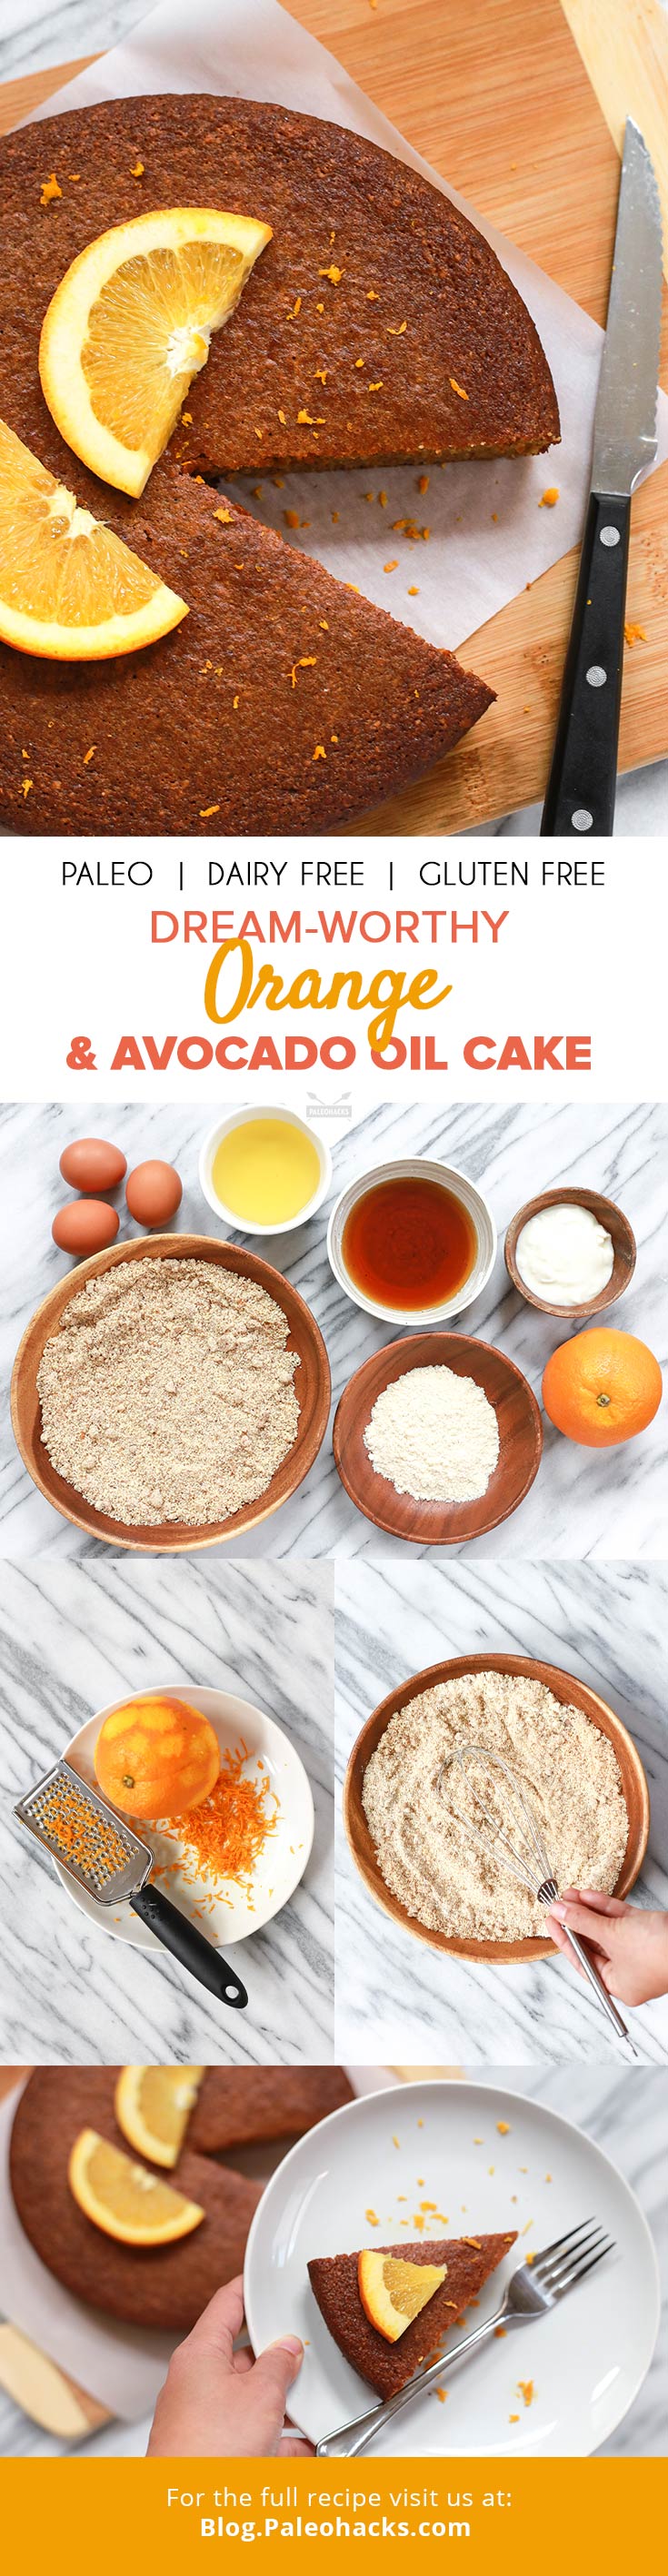 A slice of this delicately sweet orange and avocado oil cake goes perfectly with a hot cup of tea for an afternoon pick-me-up.